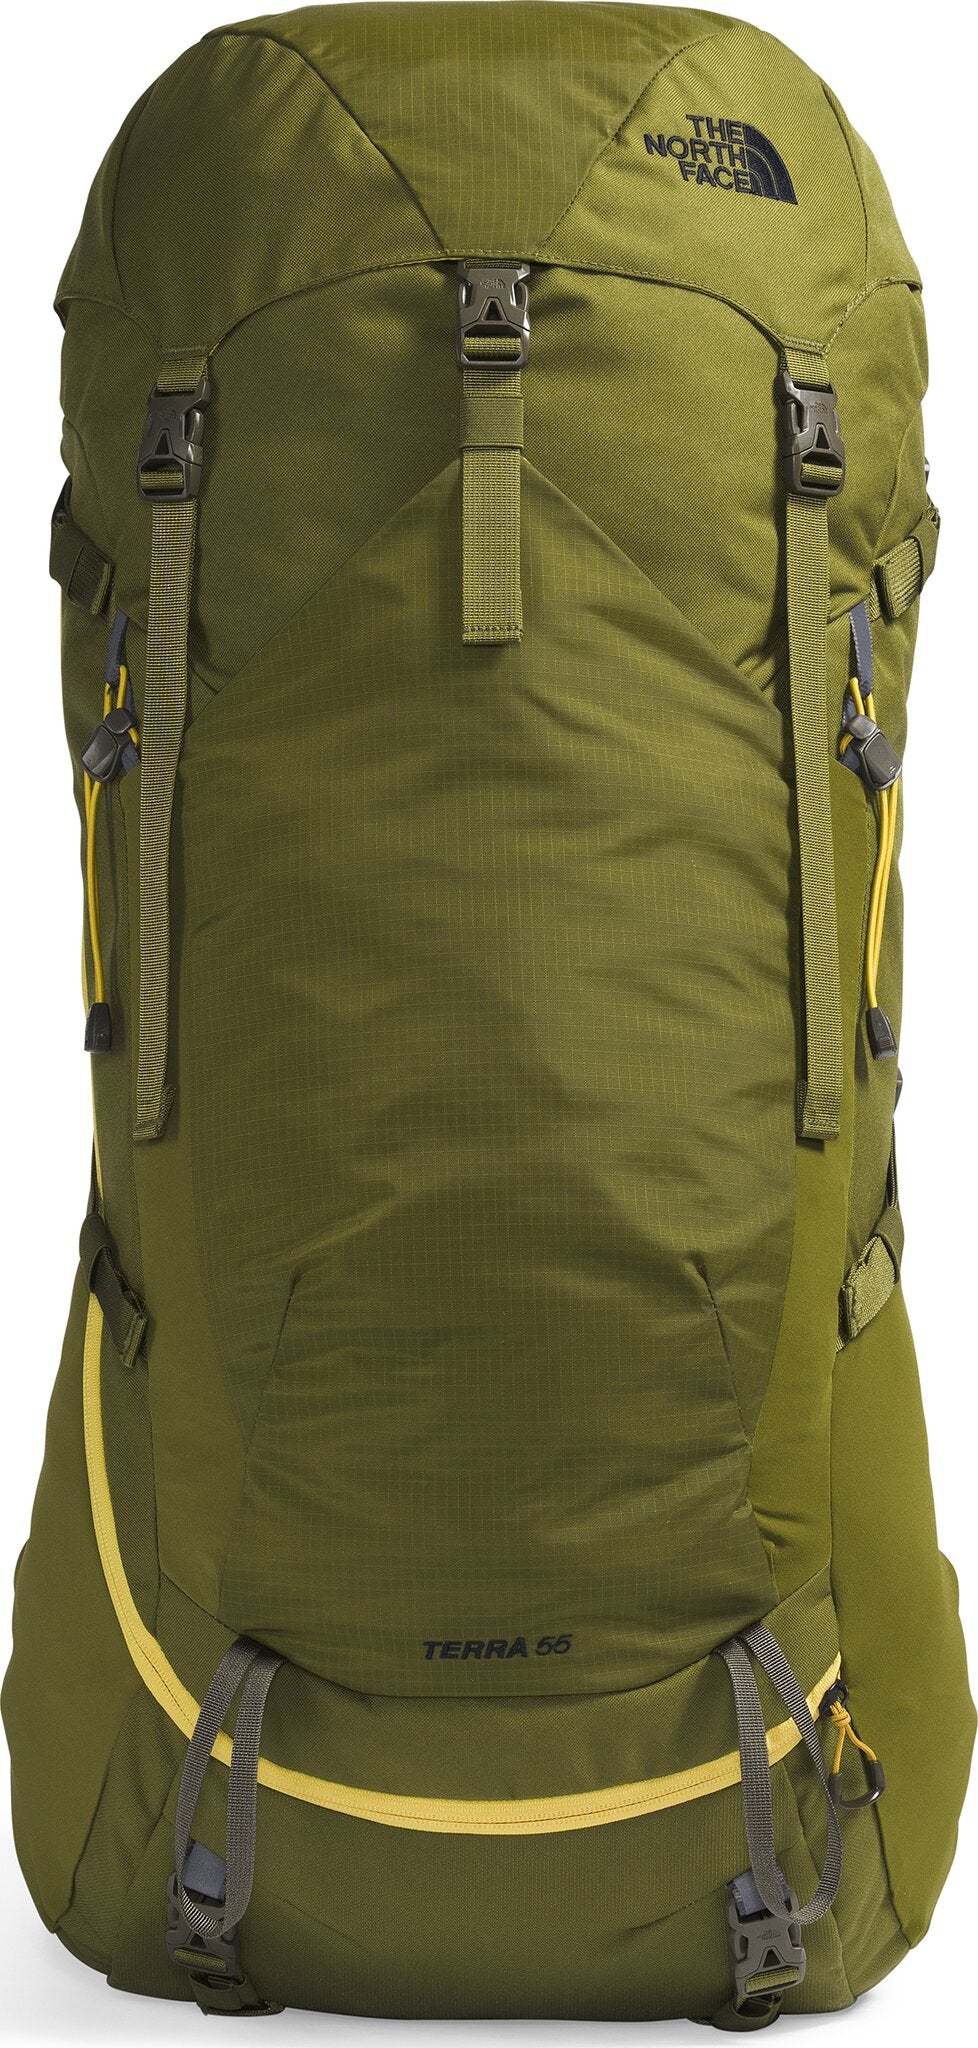 The North Face Terra 55 Backpack - Men's